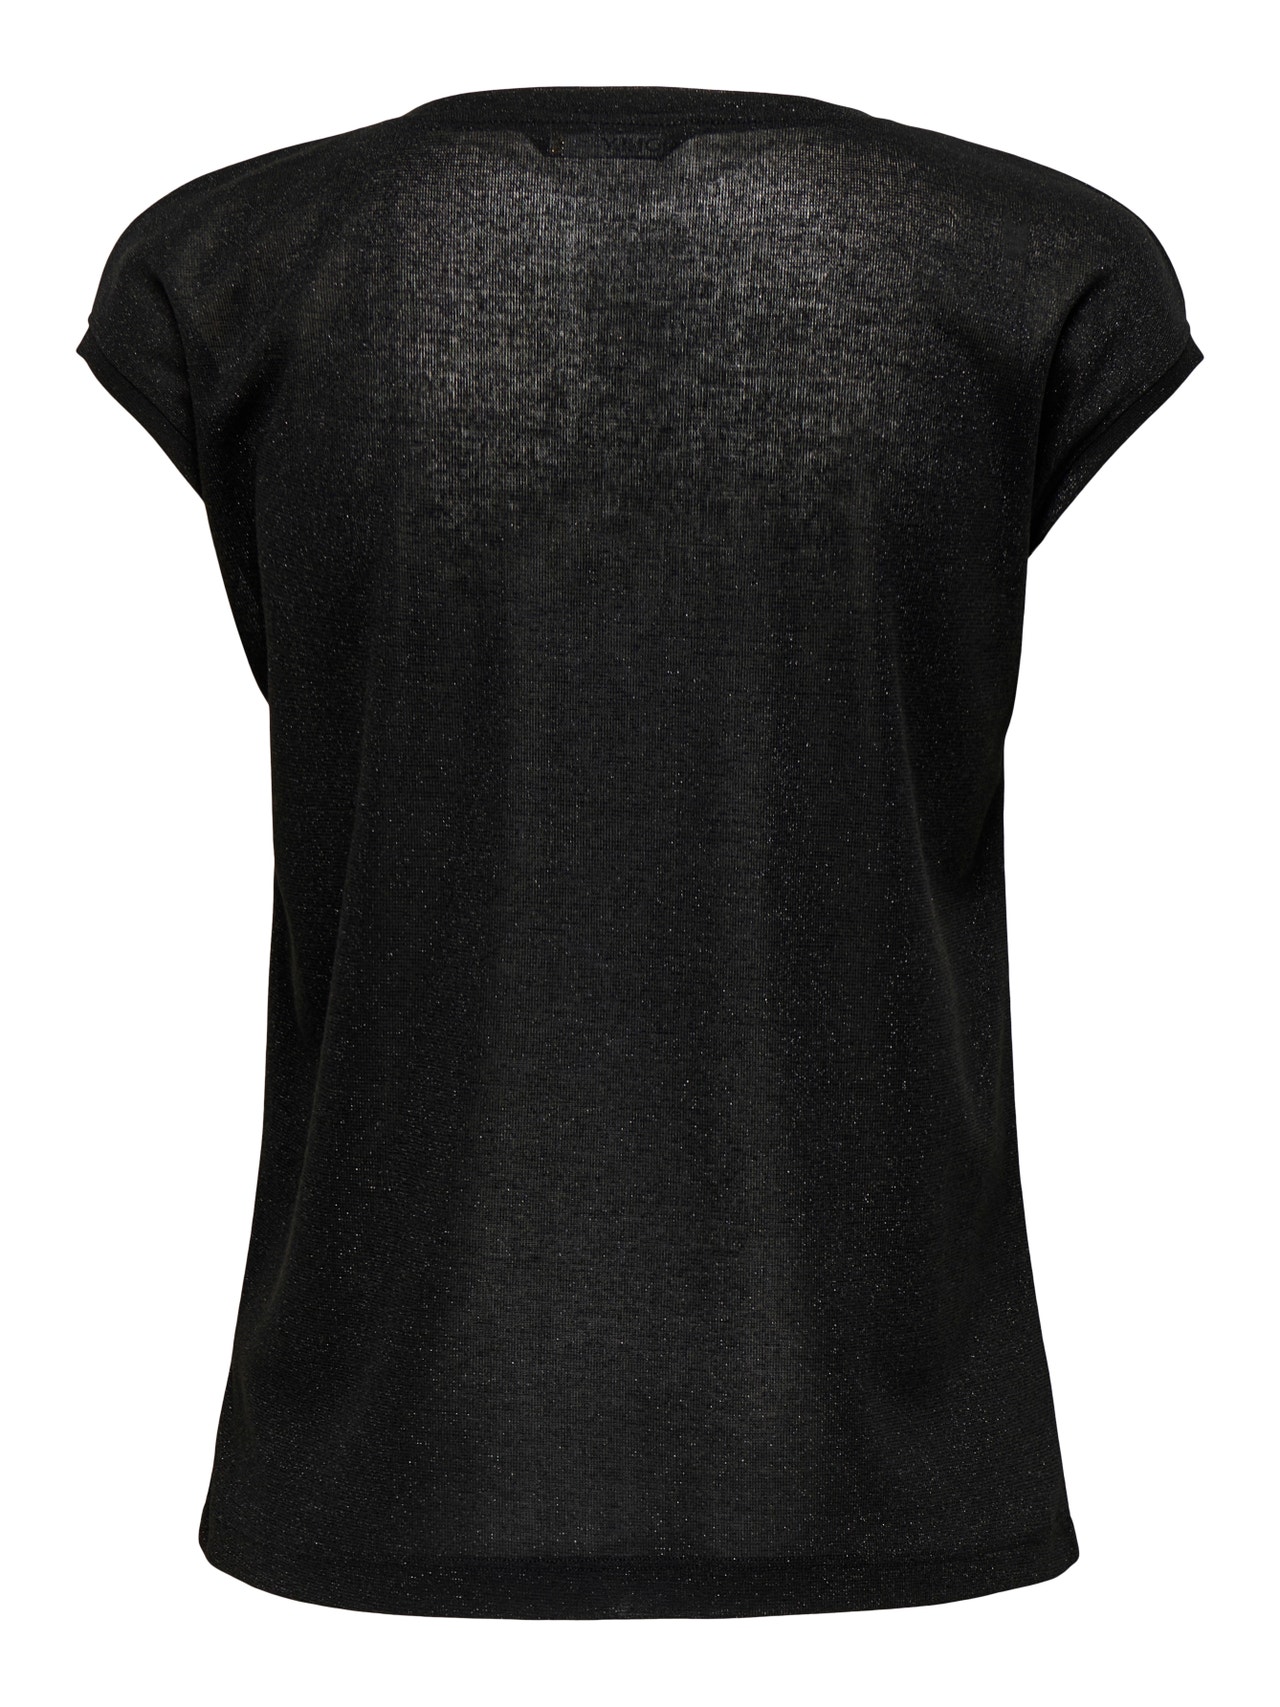 ONLY Loose Fit Round Neck Top -Black - 15136069